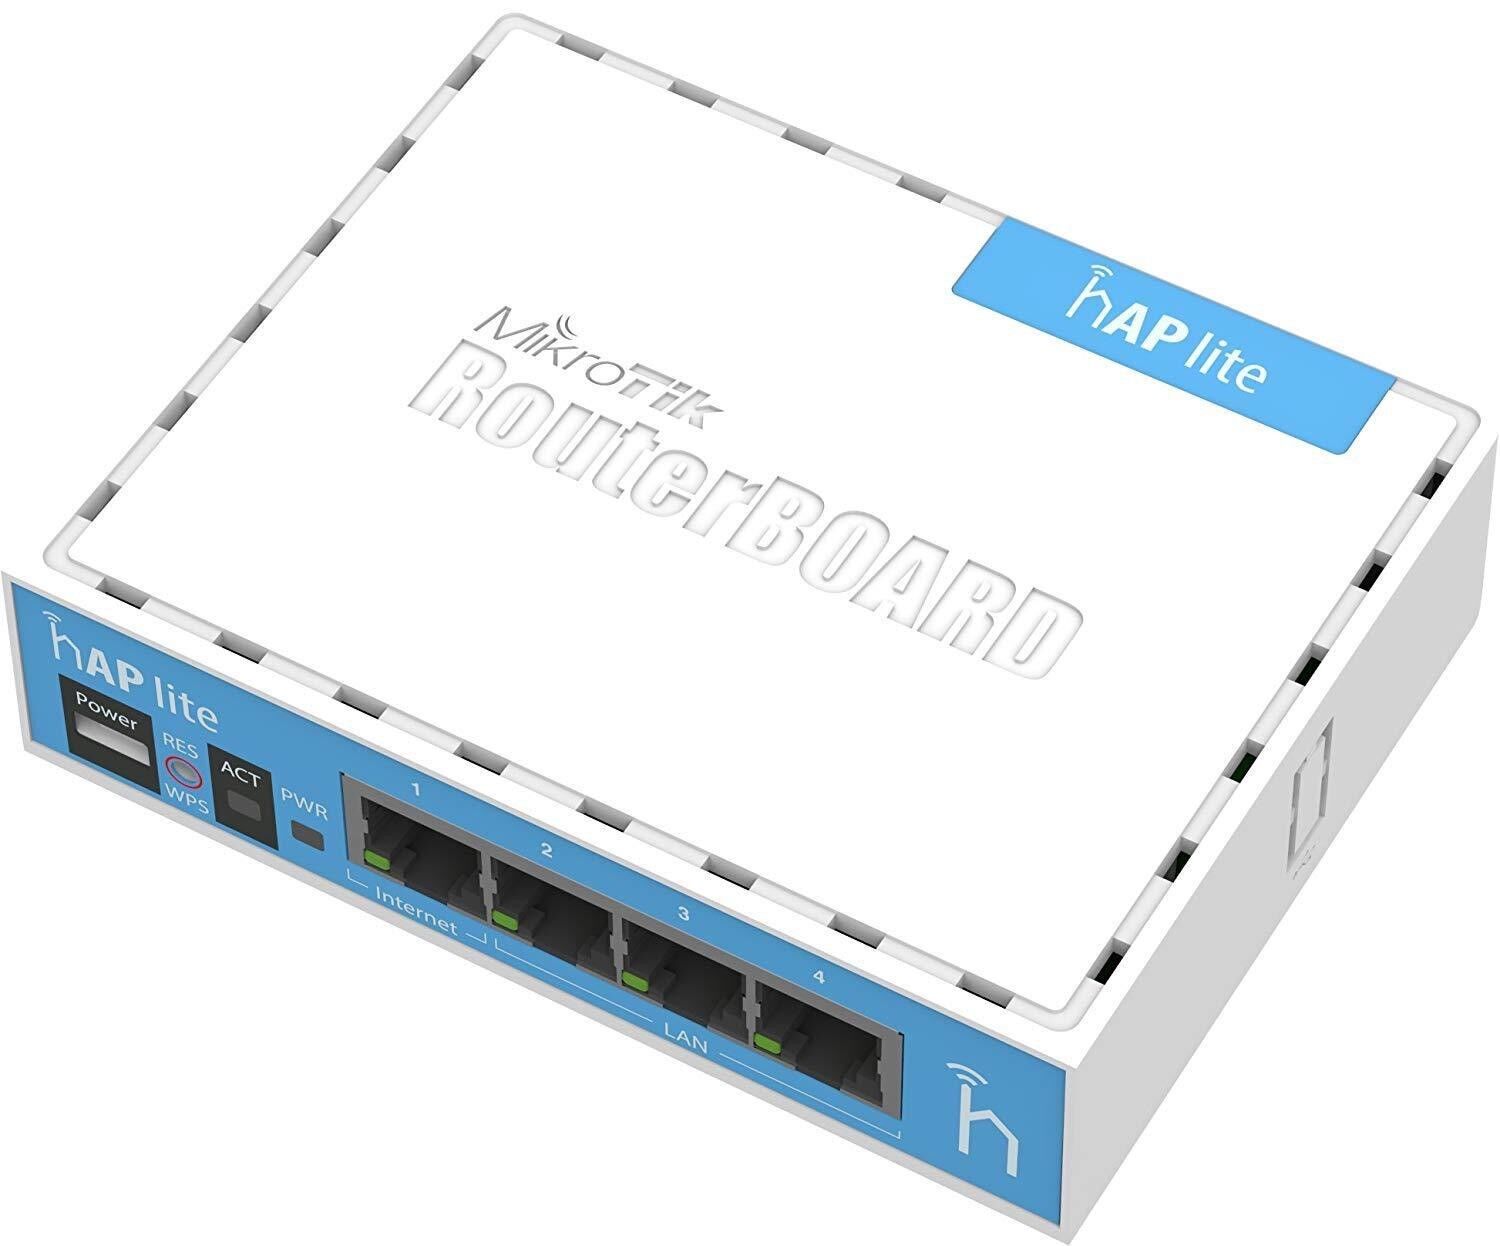 Mikrotik hAP Lite Classic Router RB941-2nD Wireless Access Point 32MB Ram 4xLAN